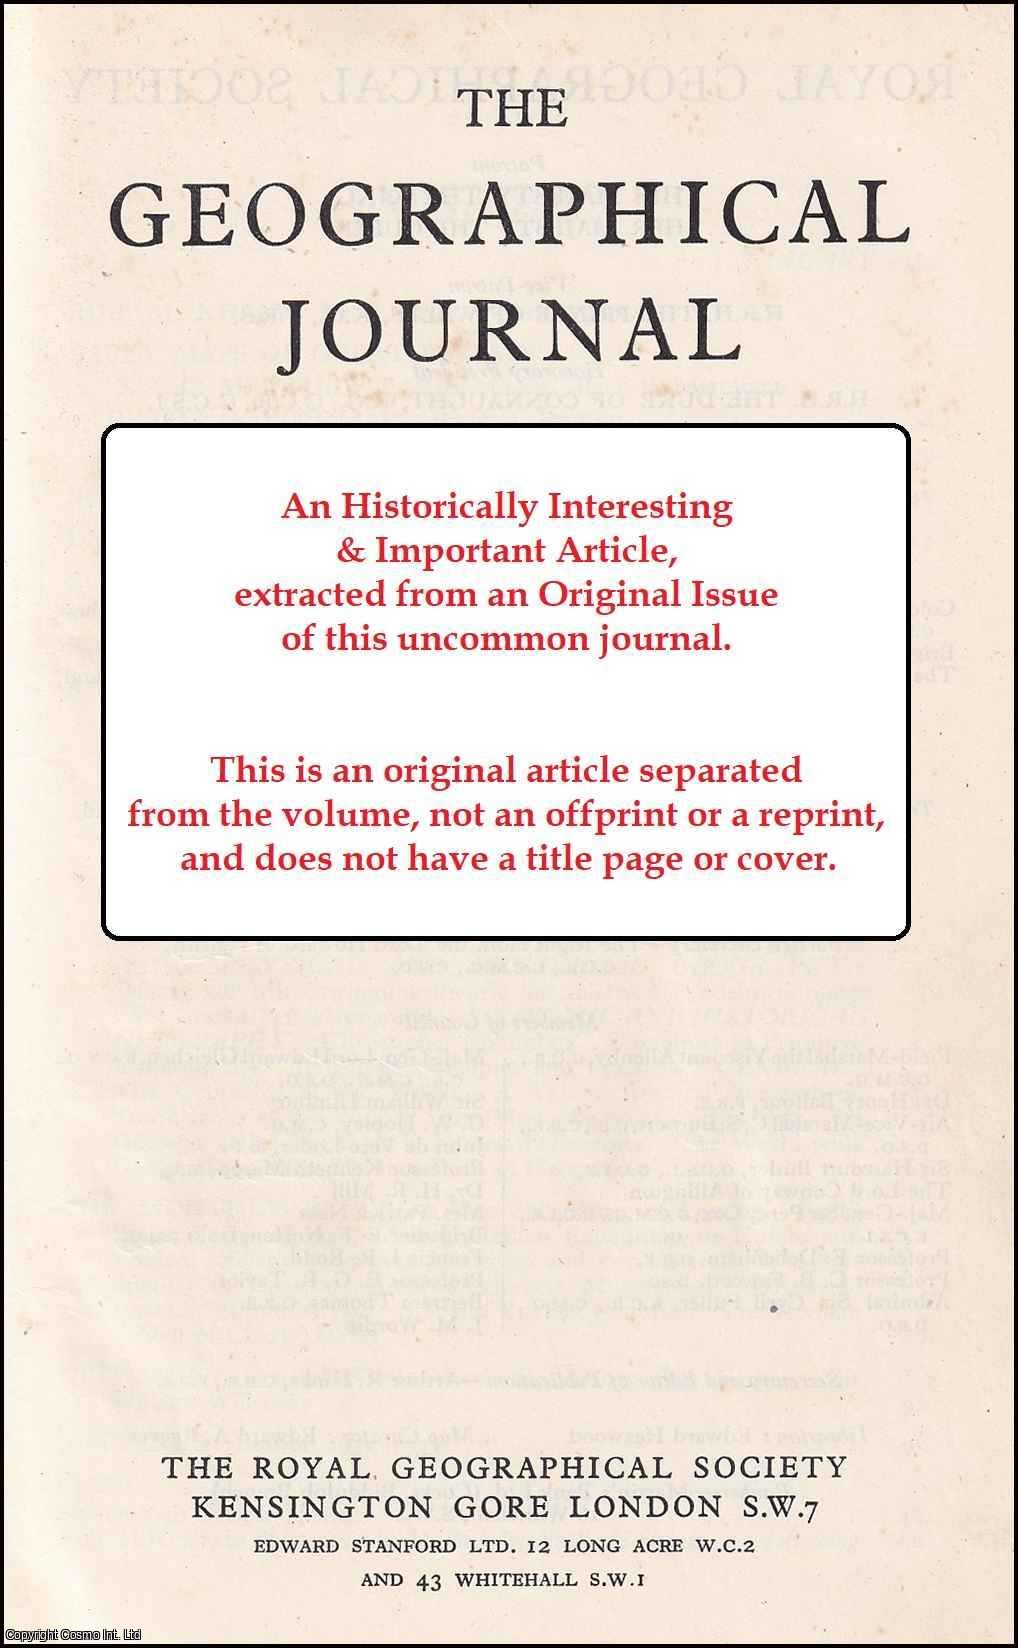 John M. Hunter - Morphology of a Bauxite Summit in Ghana. An original article from the Geographical Journal, 1961.